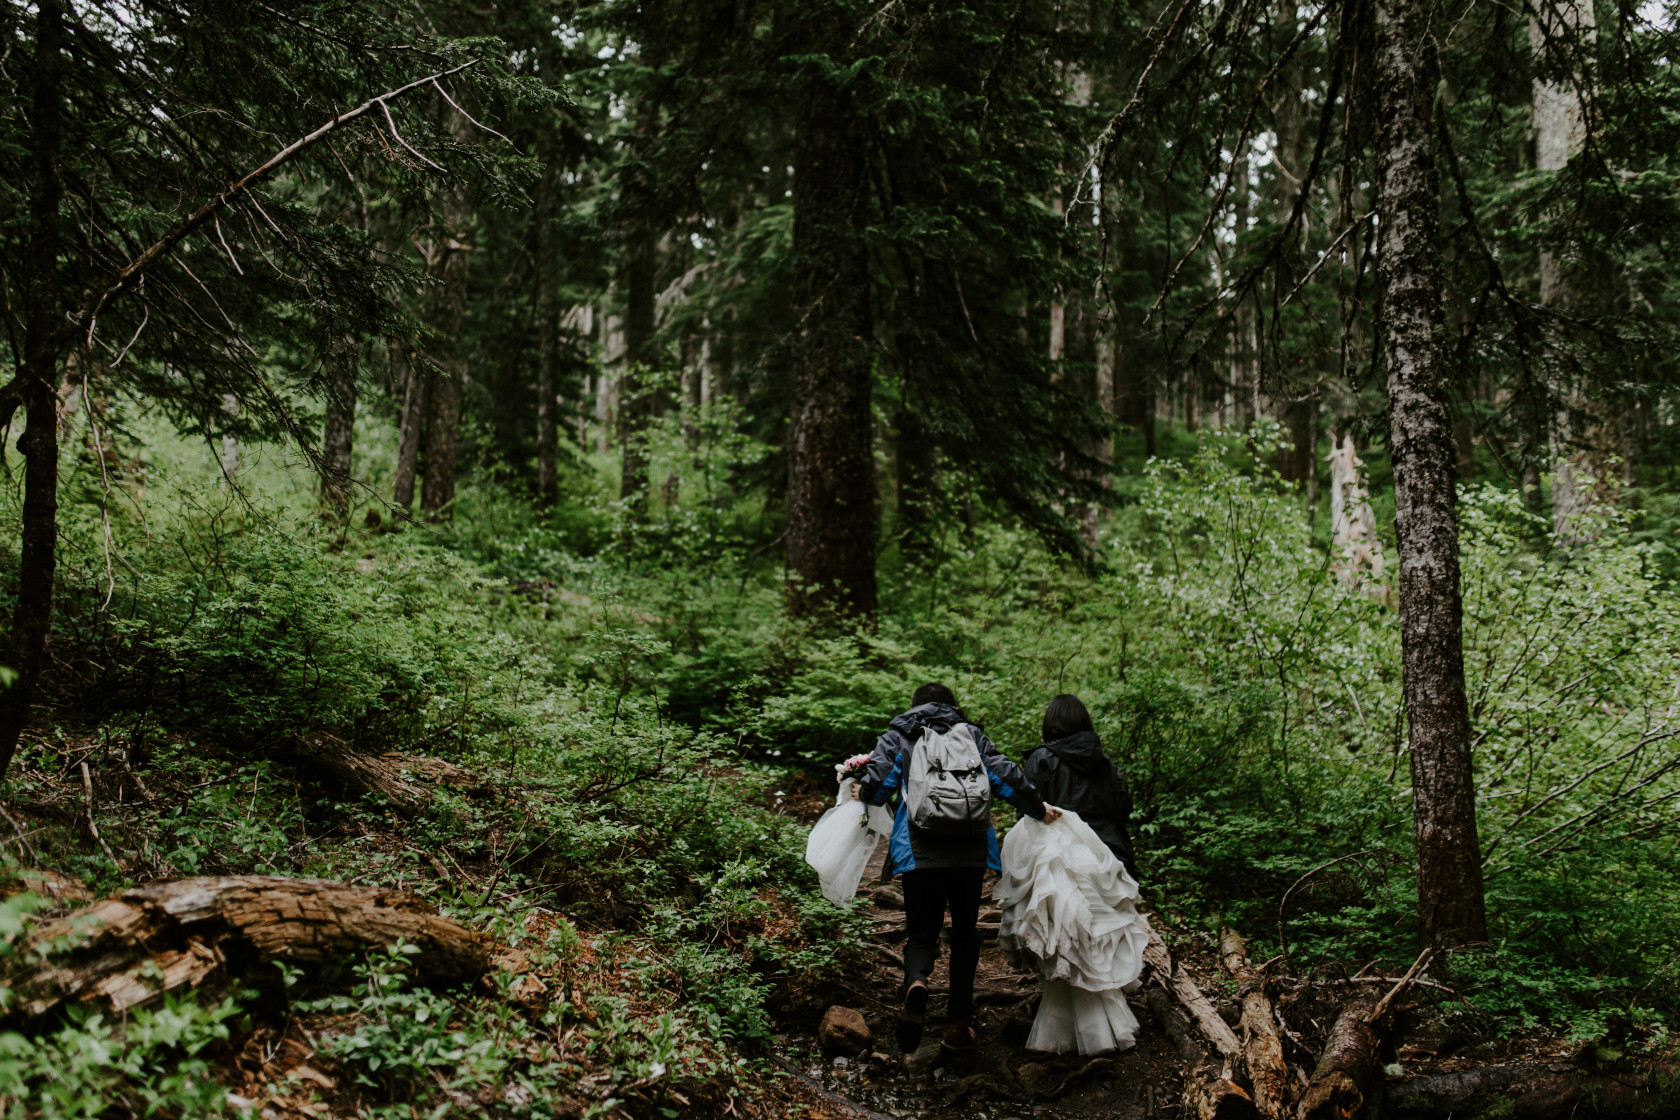 Valerie and Alex hike toward Mount Hood. Elopement wedding photography at Mount Hood by Sienna Plus Josh.